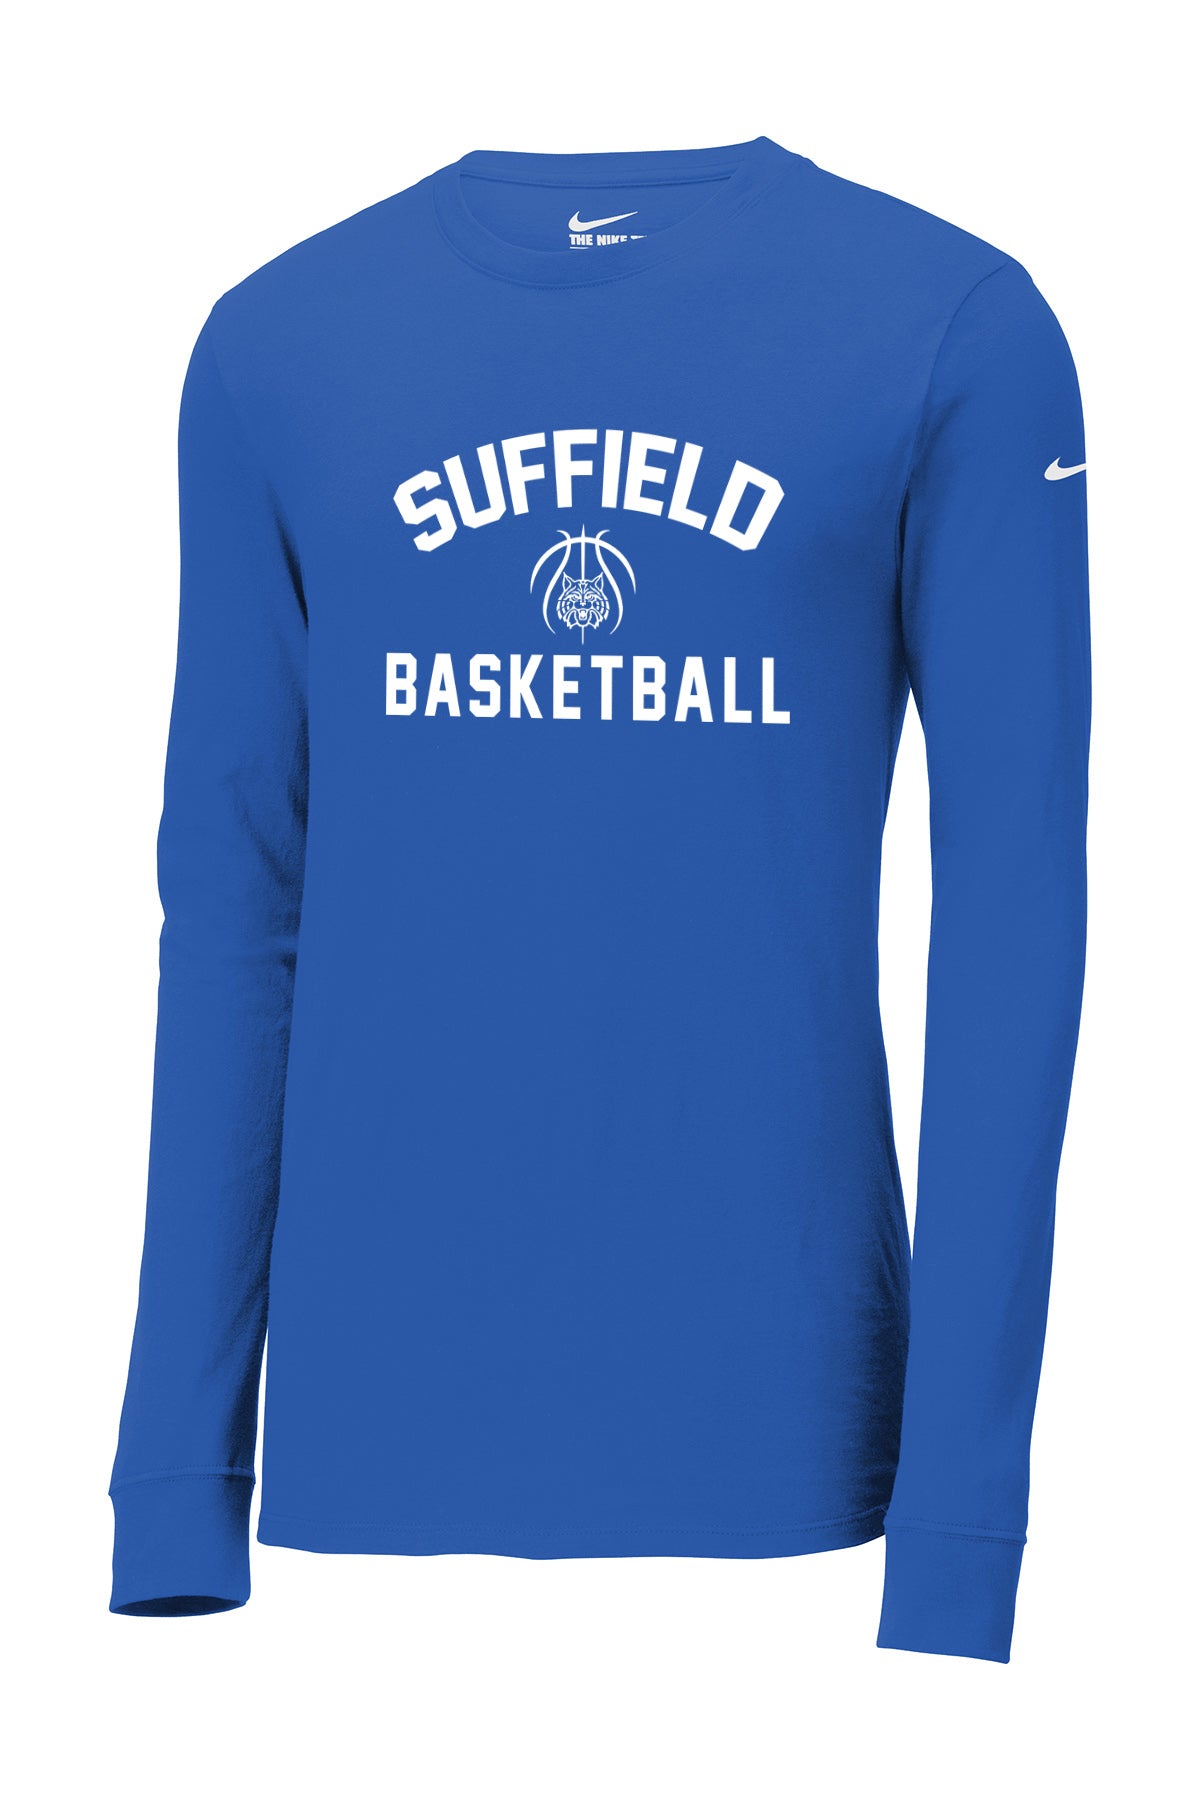 Suffield TB - Men’s Nike Dry-Fit Long Sleeve Tee "Classic Full" - NKBQ52300 (color options available)